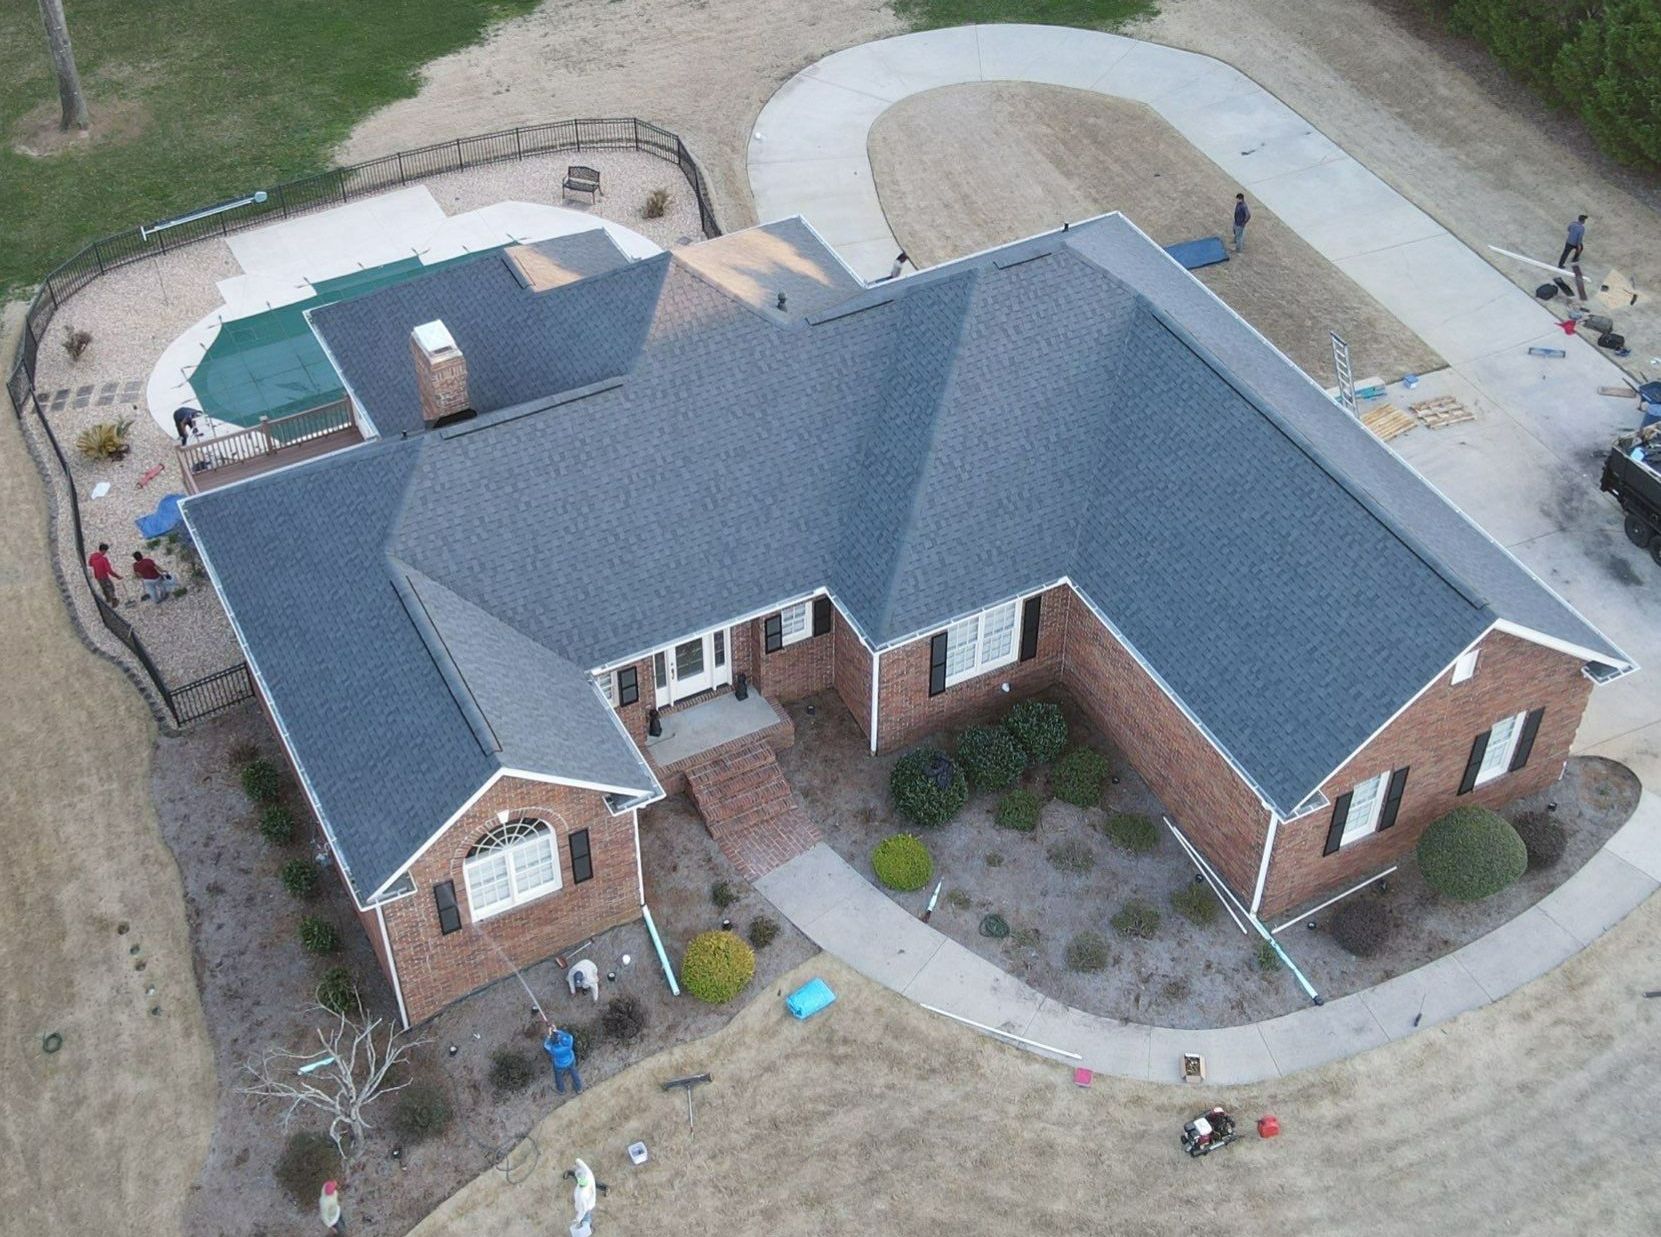 An aerial view of a brick house with a blue roof